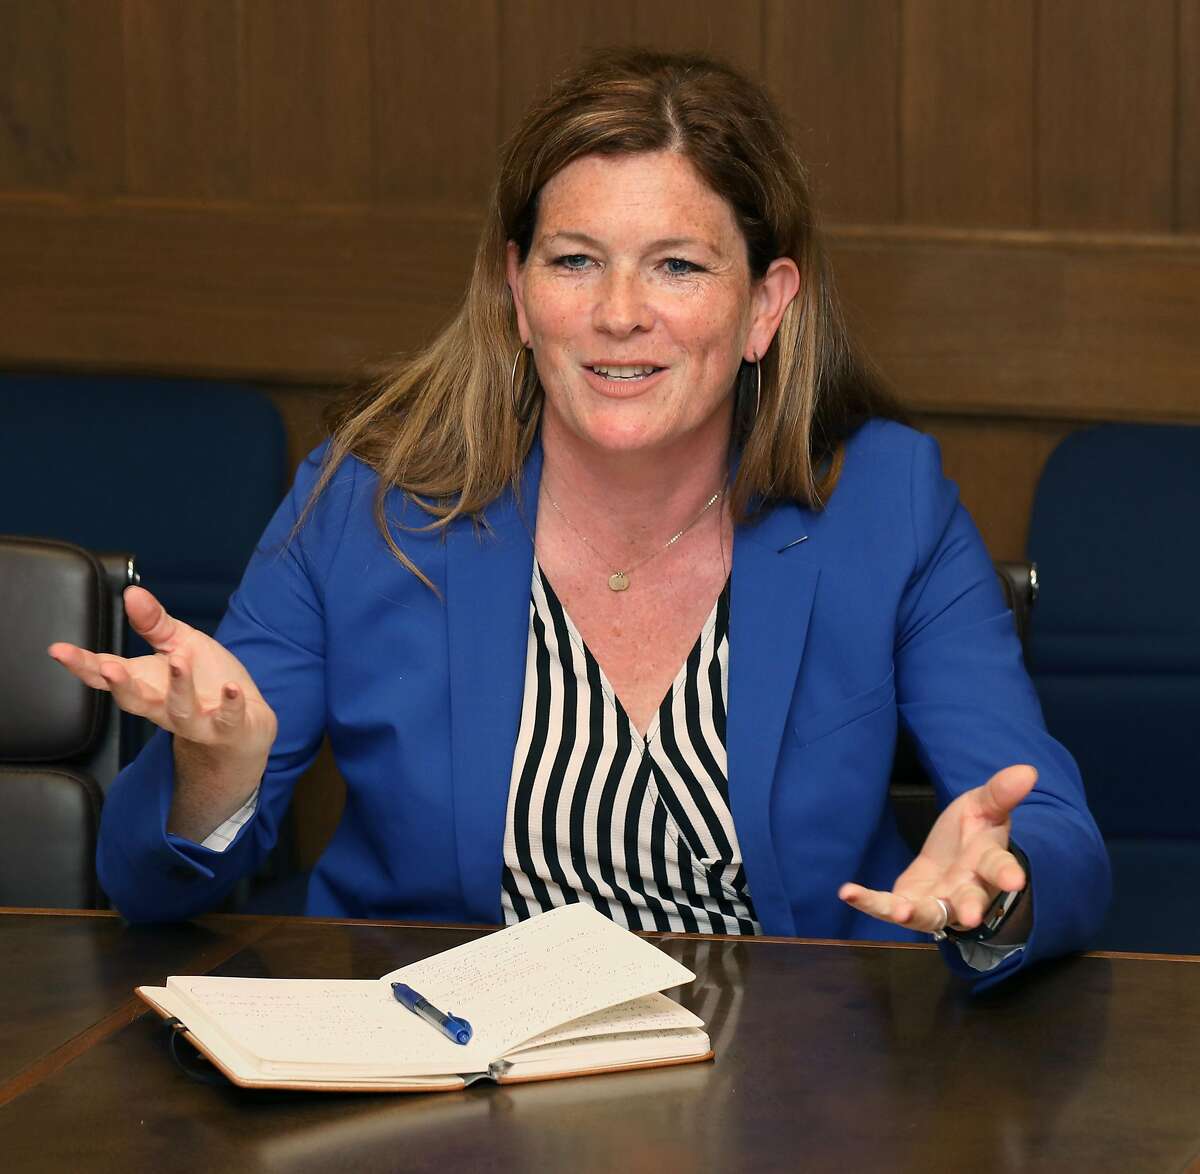 Candidate for district attorney Suzy Loftus comes to an editorial board meeting at the San Francisco Chronicle on Wednesday, September 25, 2019, in San Francisco, Calif.